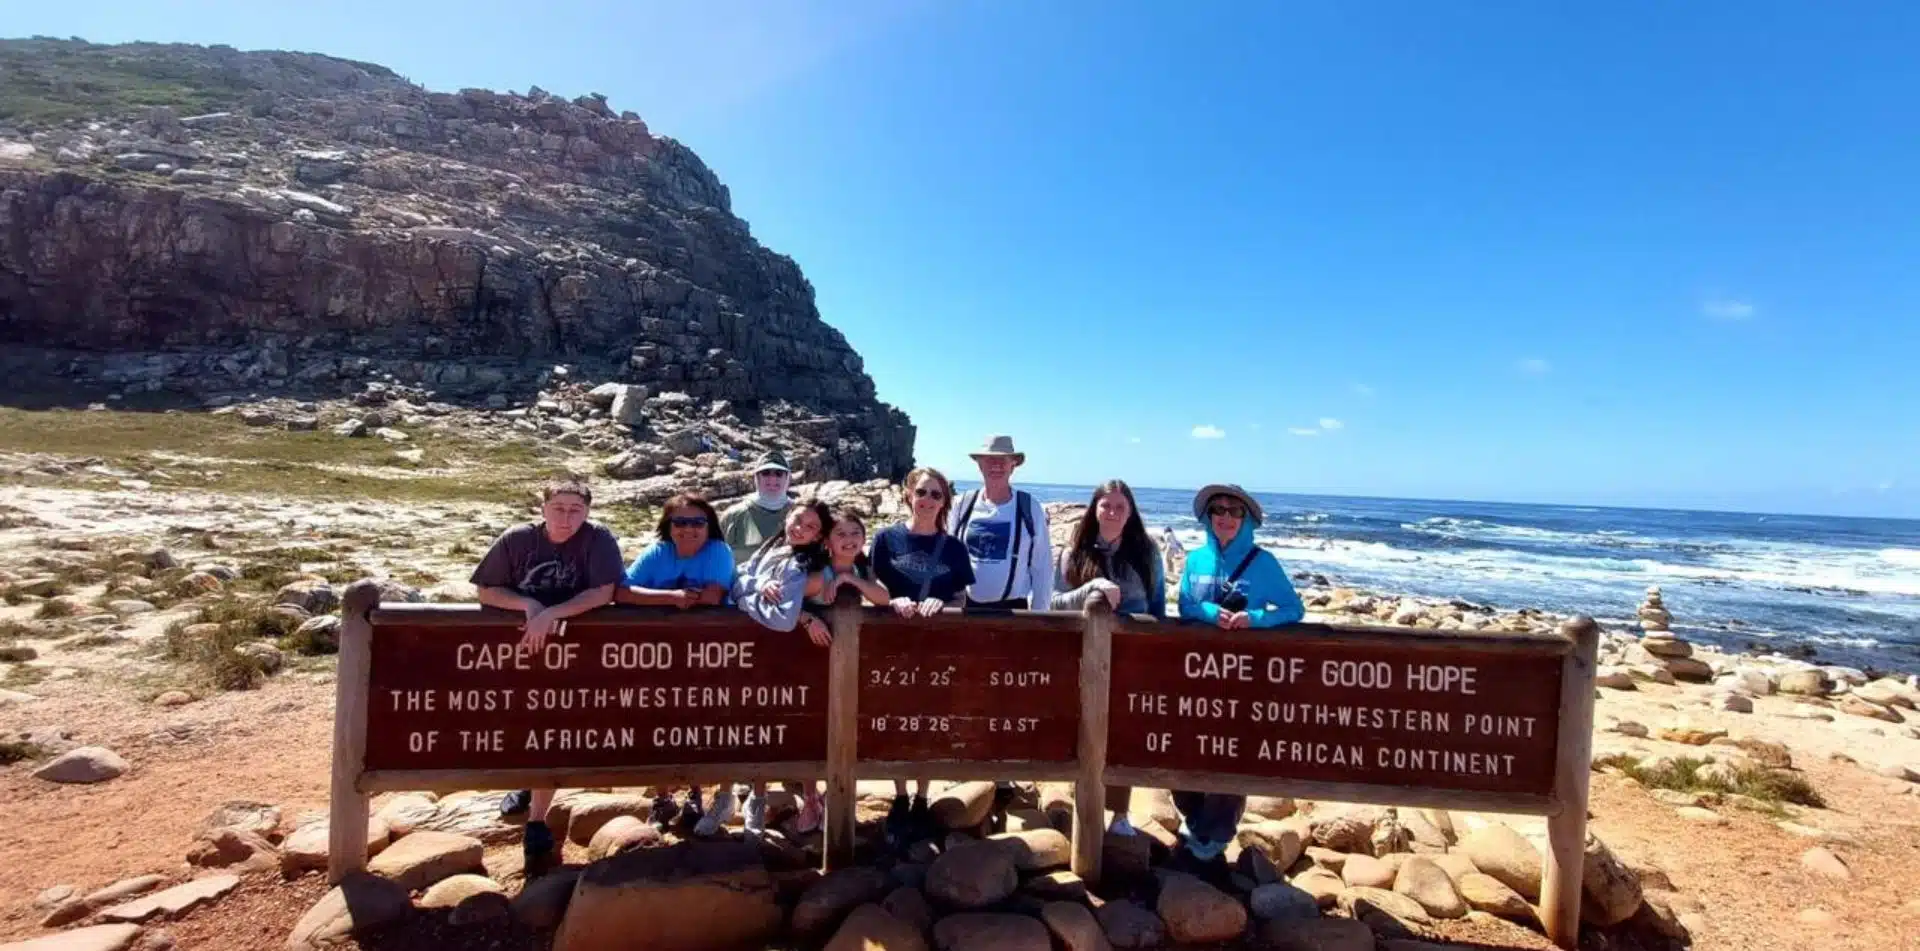 Classic Journeys guests enjoying time together in South Africa